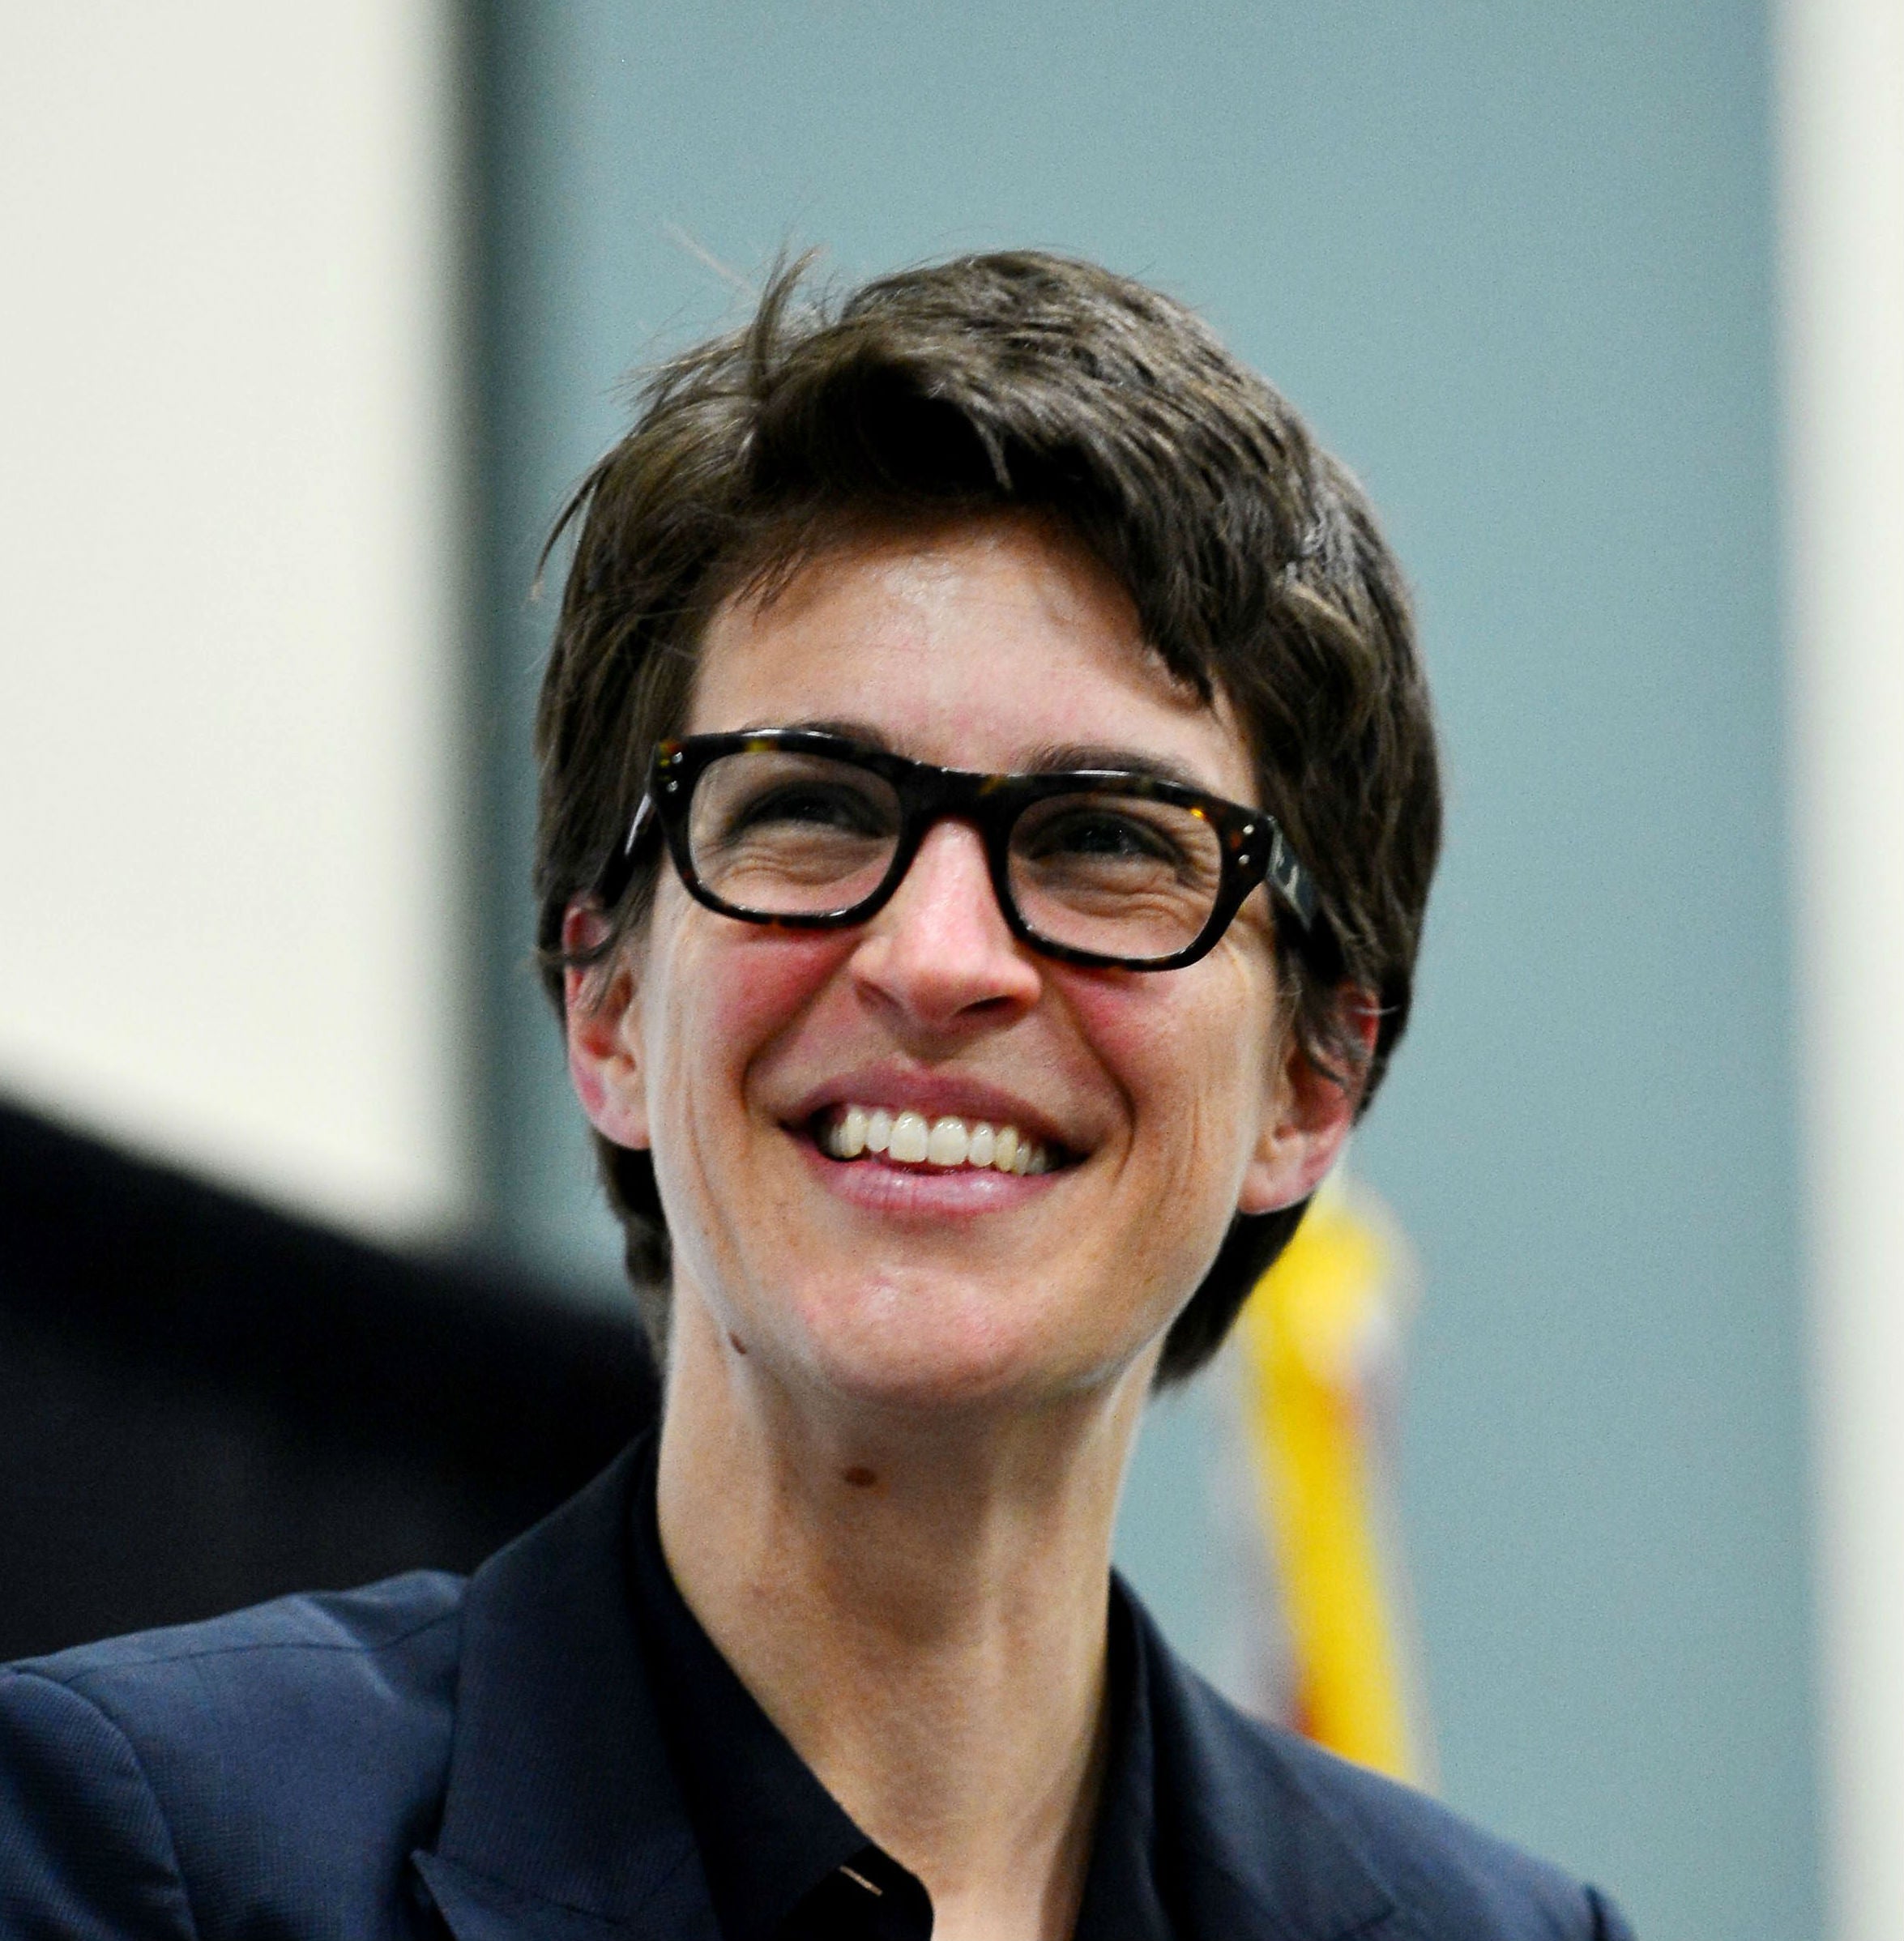 MSNC anchor Rachel Maddow said she can relate to and get on with politicians from either side